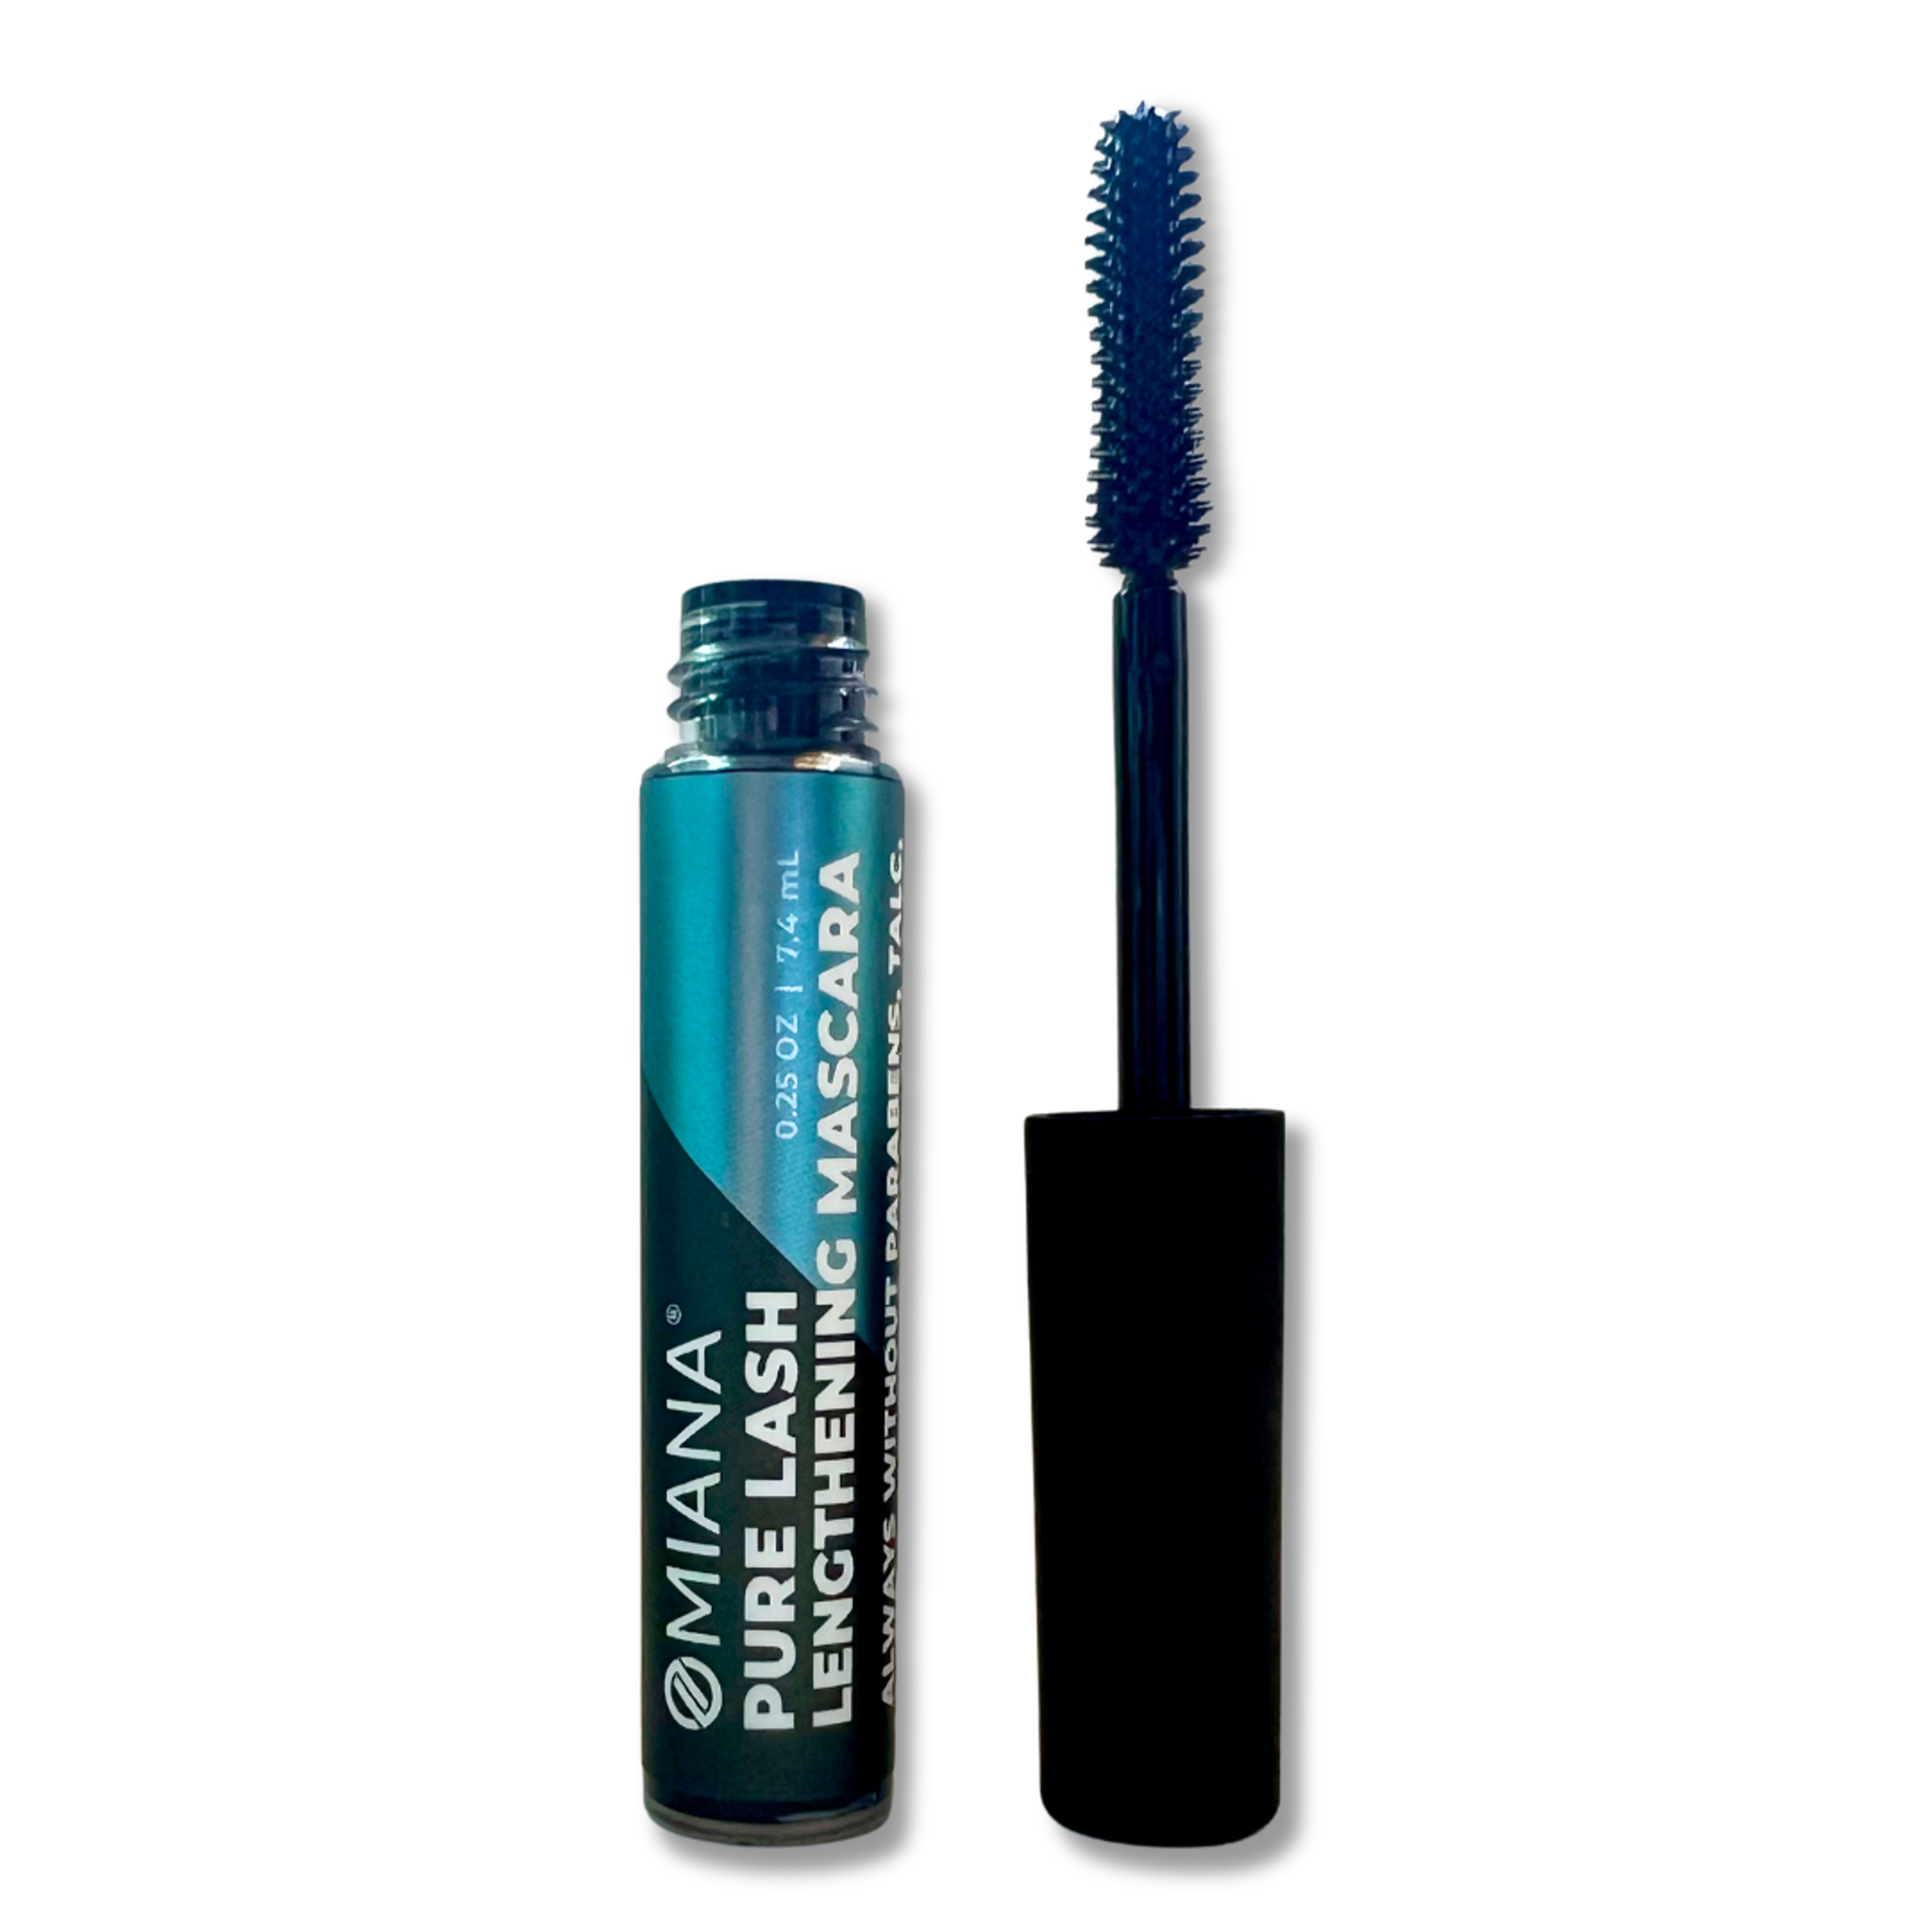 Titanium Dioxide-Free & Mica-Free Pure Lash Lengthening Mascara with hydrating panthenol and clump-free wand for short lashes by Omiana